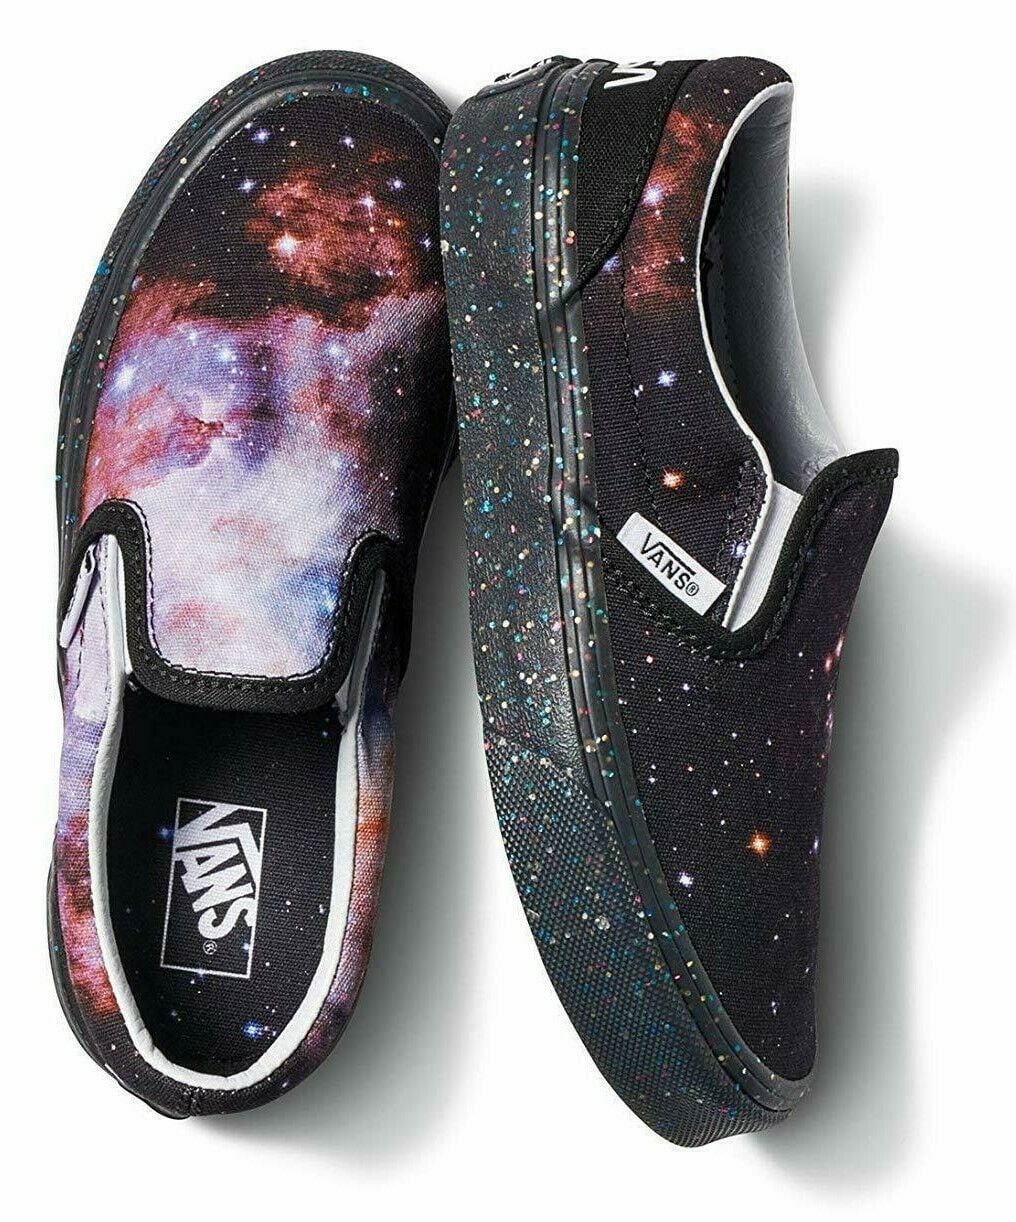 Vans lace up space galaxy cosmos youth shoes size 2